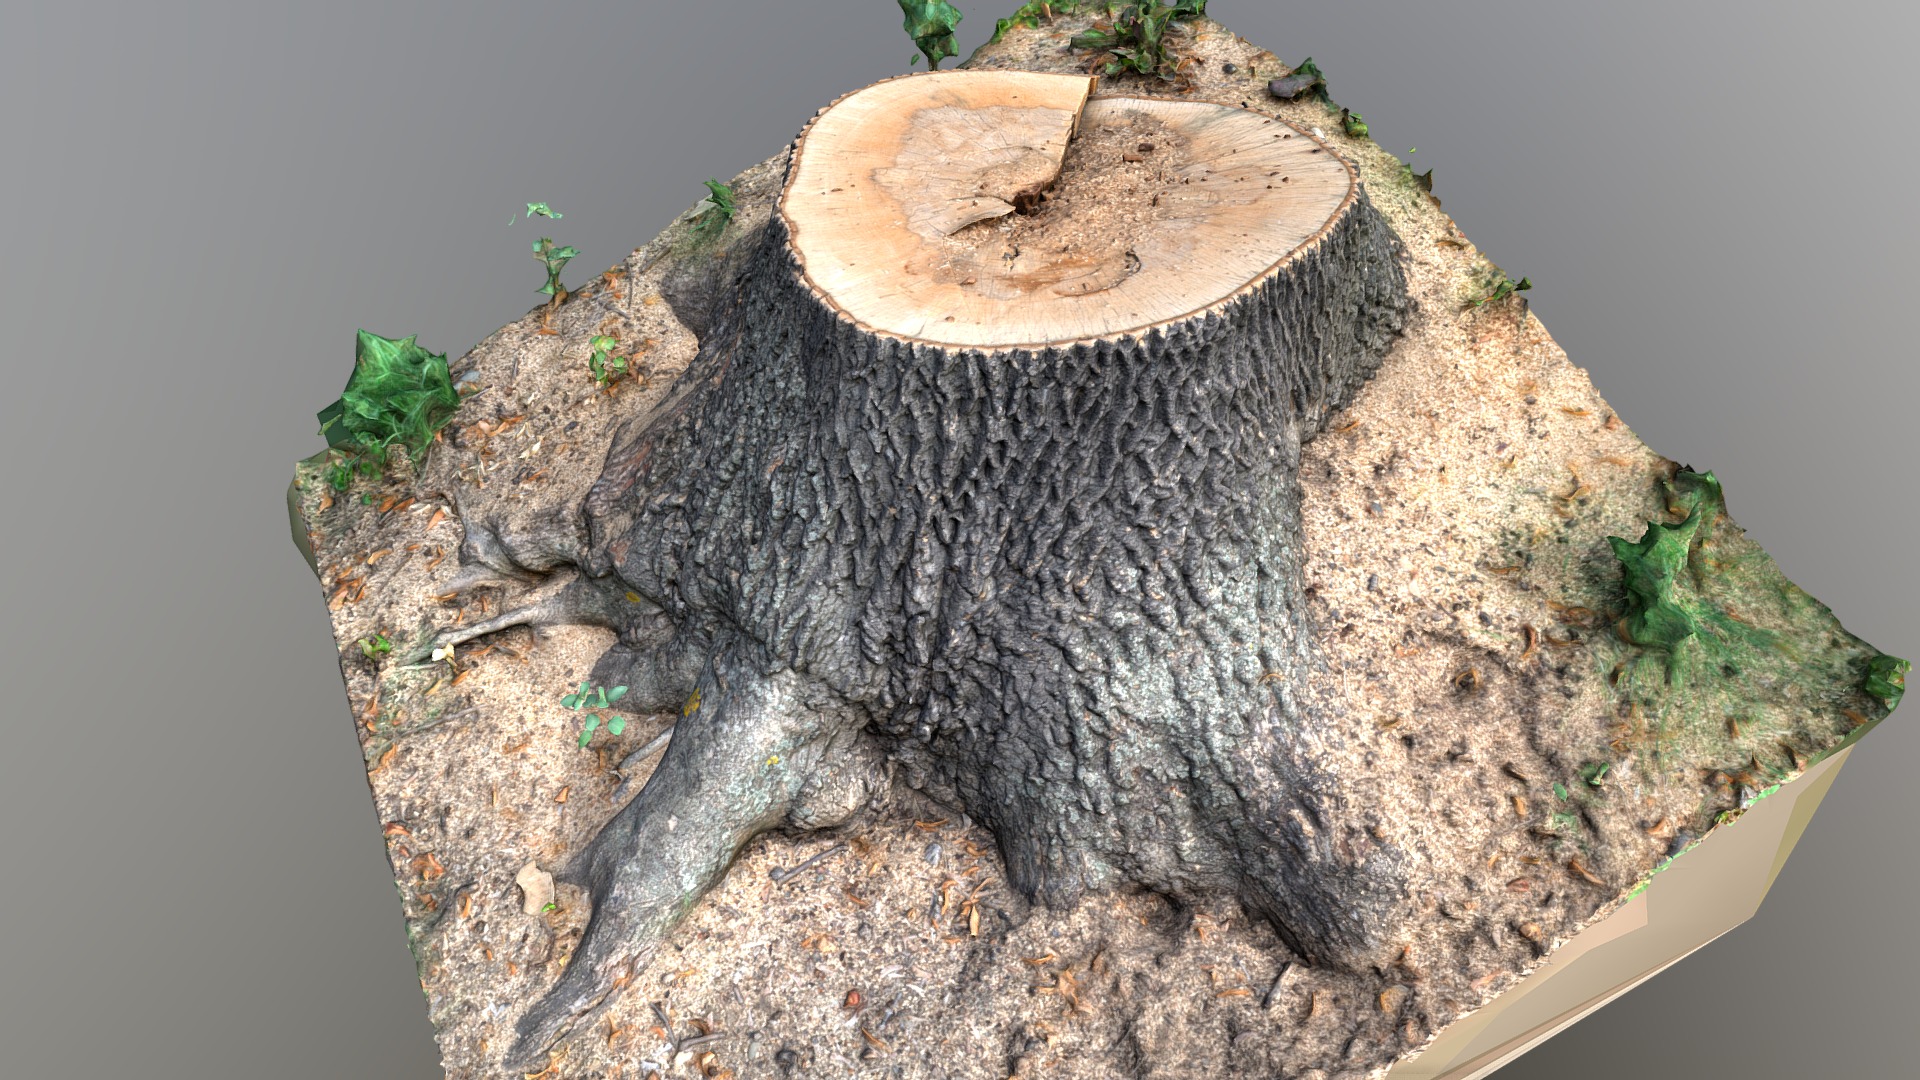 3D model Cut oak tree stump with roots - This is a 3D model of the Cut oak tree stump with roots. The 3D model is about a brown frog on a rock.